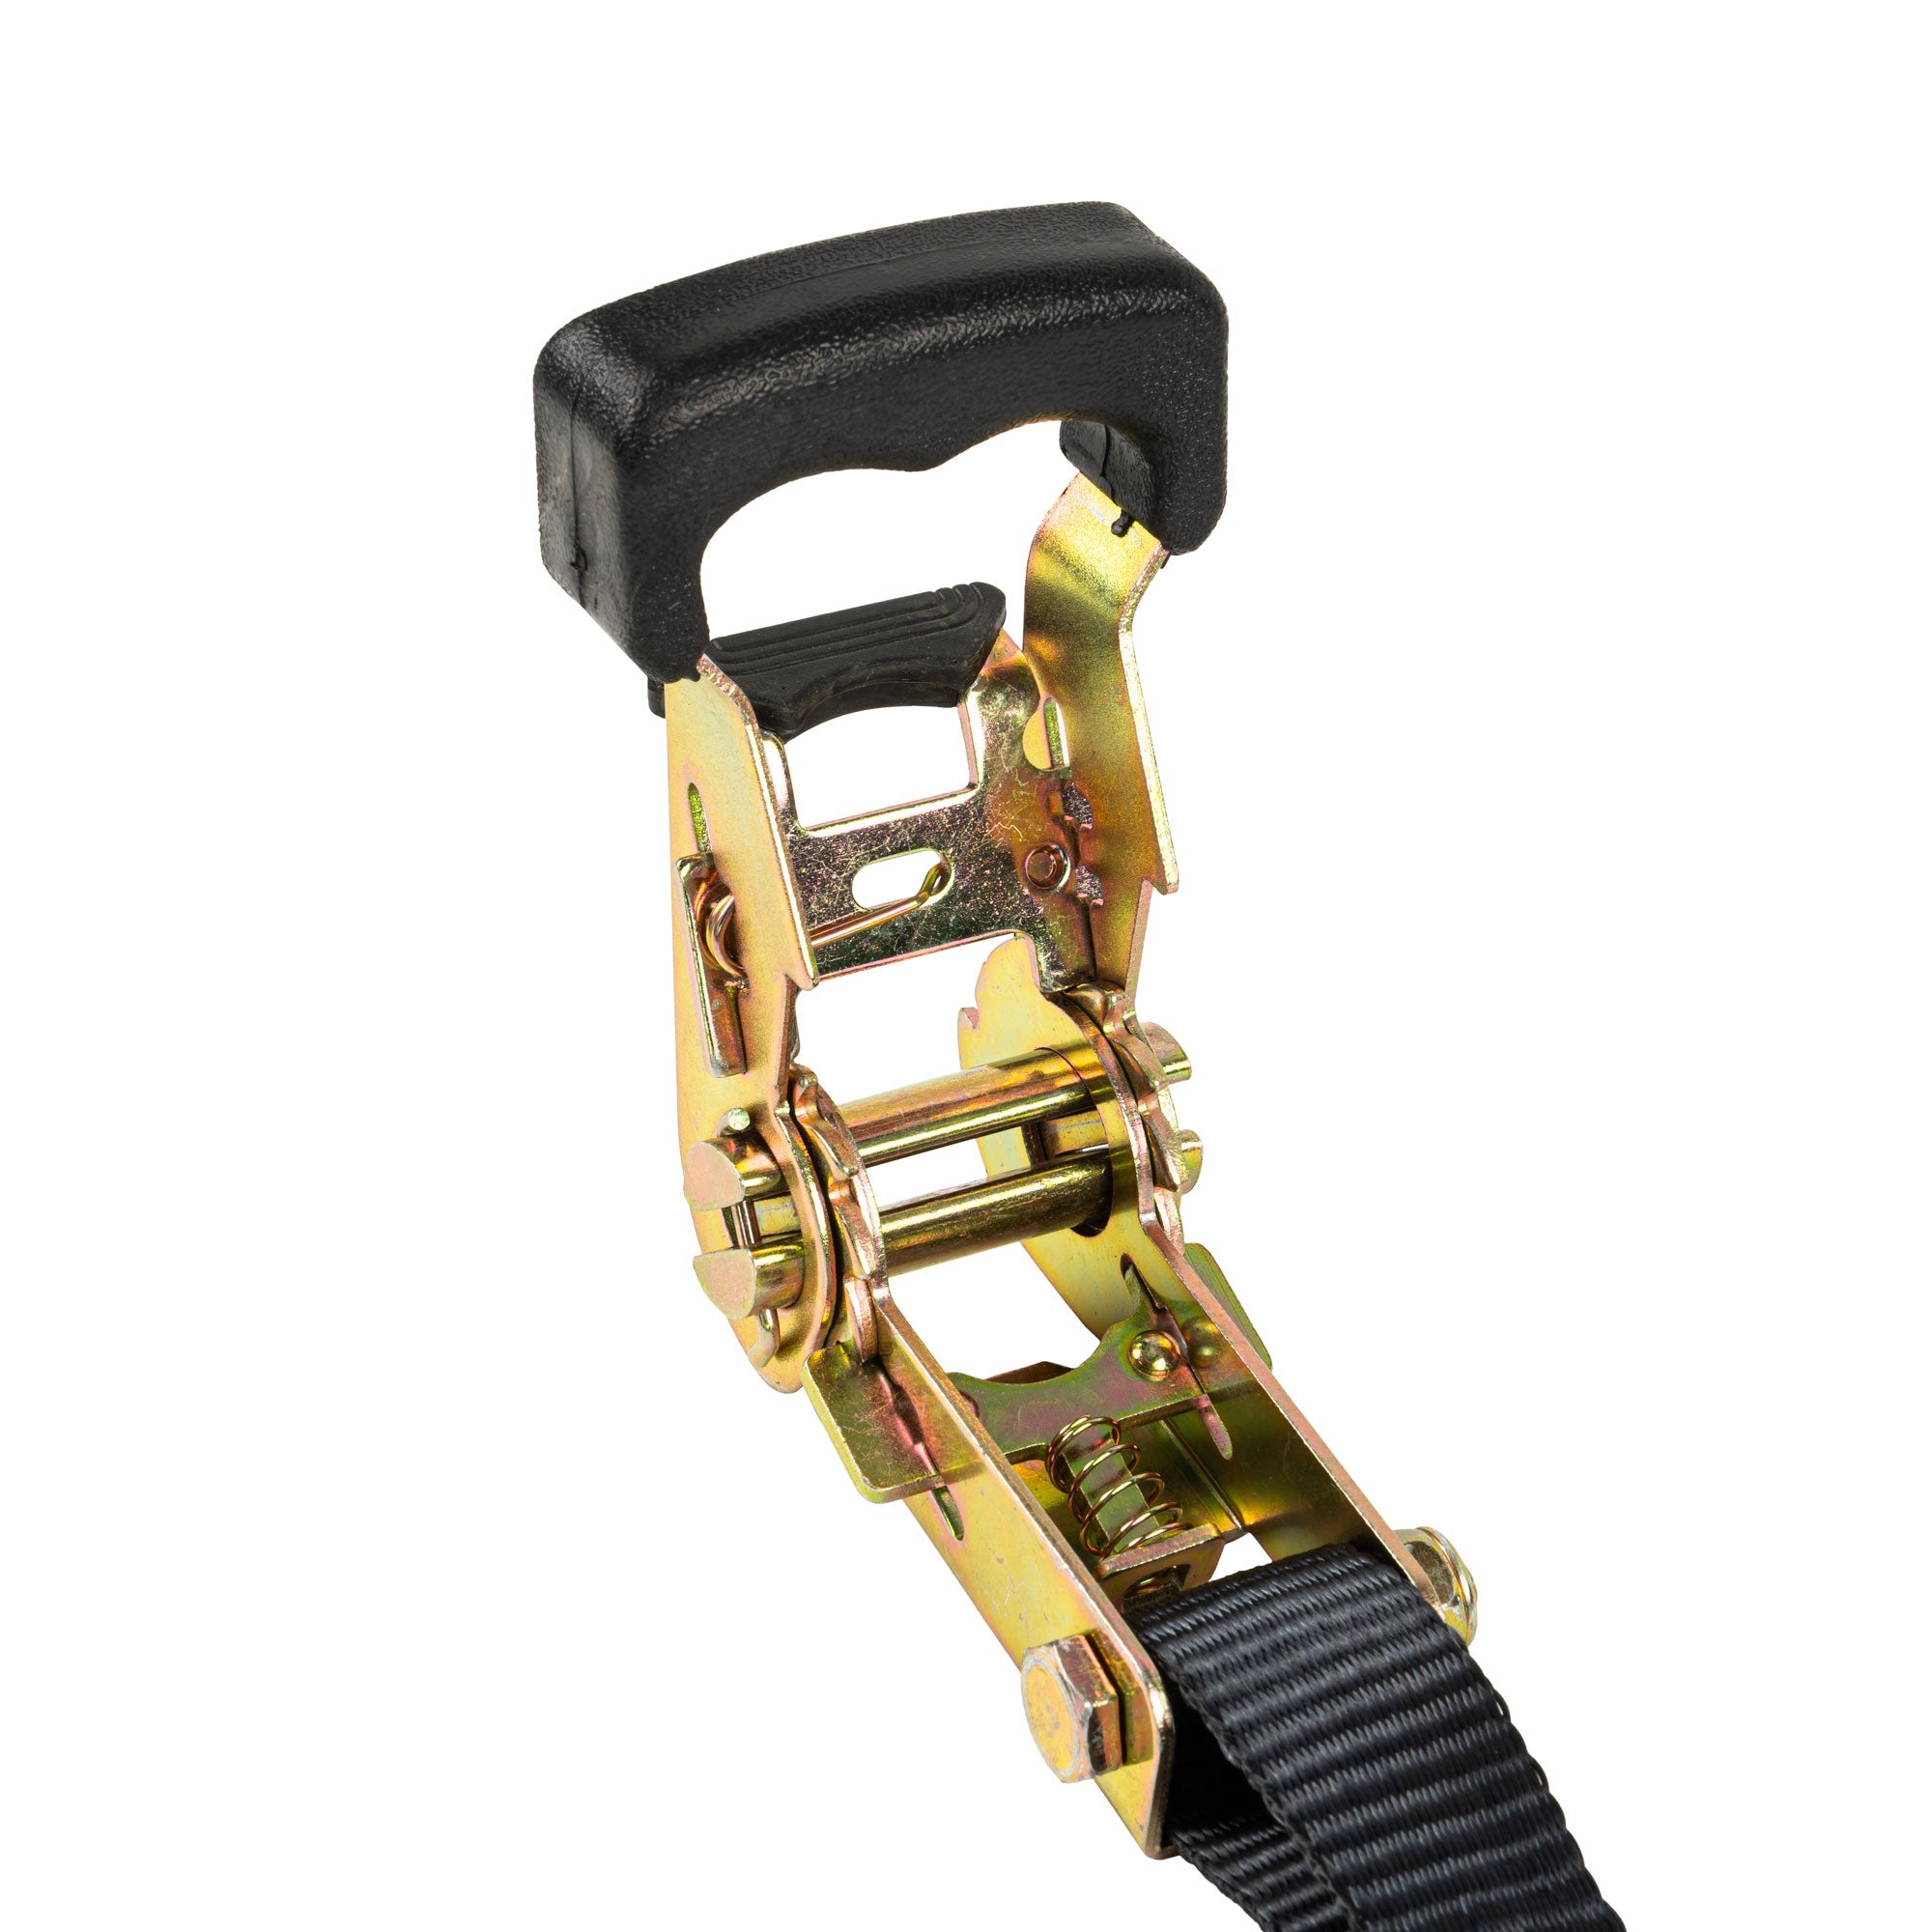 https://www.theperfectbungee.com/cdn/shop/products/10ft-x-1in-shockstrap-ratchet-strap-premium-polyester-webbing-1500lb-break-strength-500lb-working-load-limitthe-perfect-bungee-shockstrap-tie-downsthe-perfect-b-770971.jpg?v=1705088459&width=2000